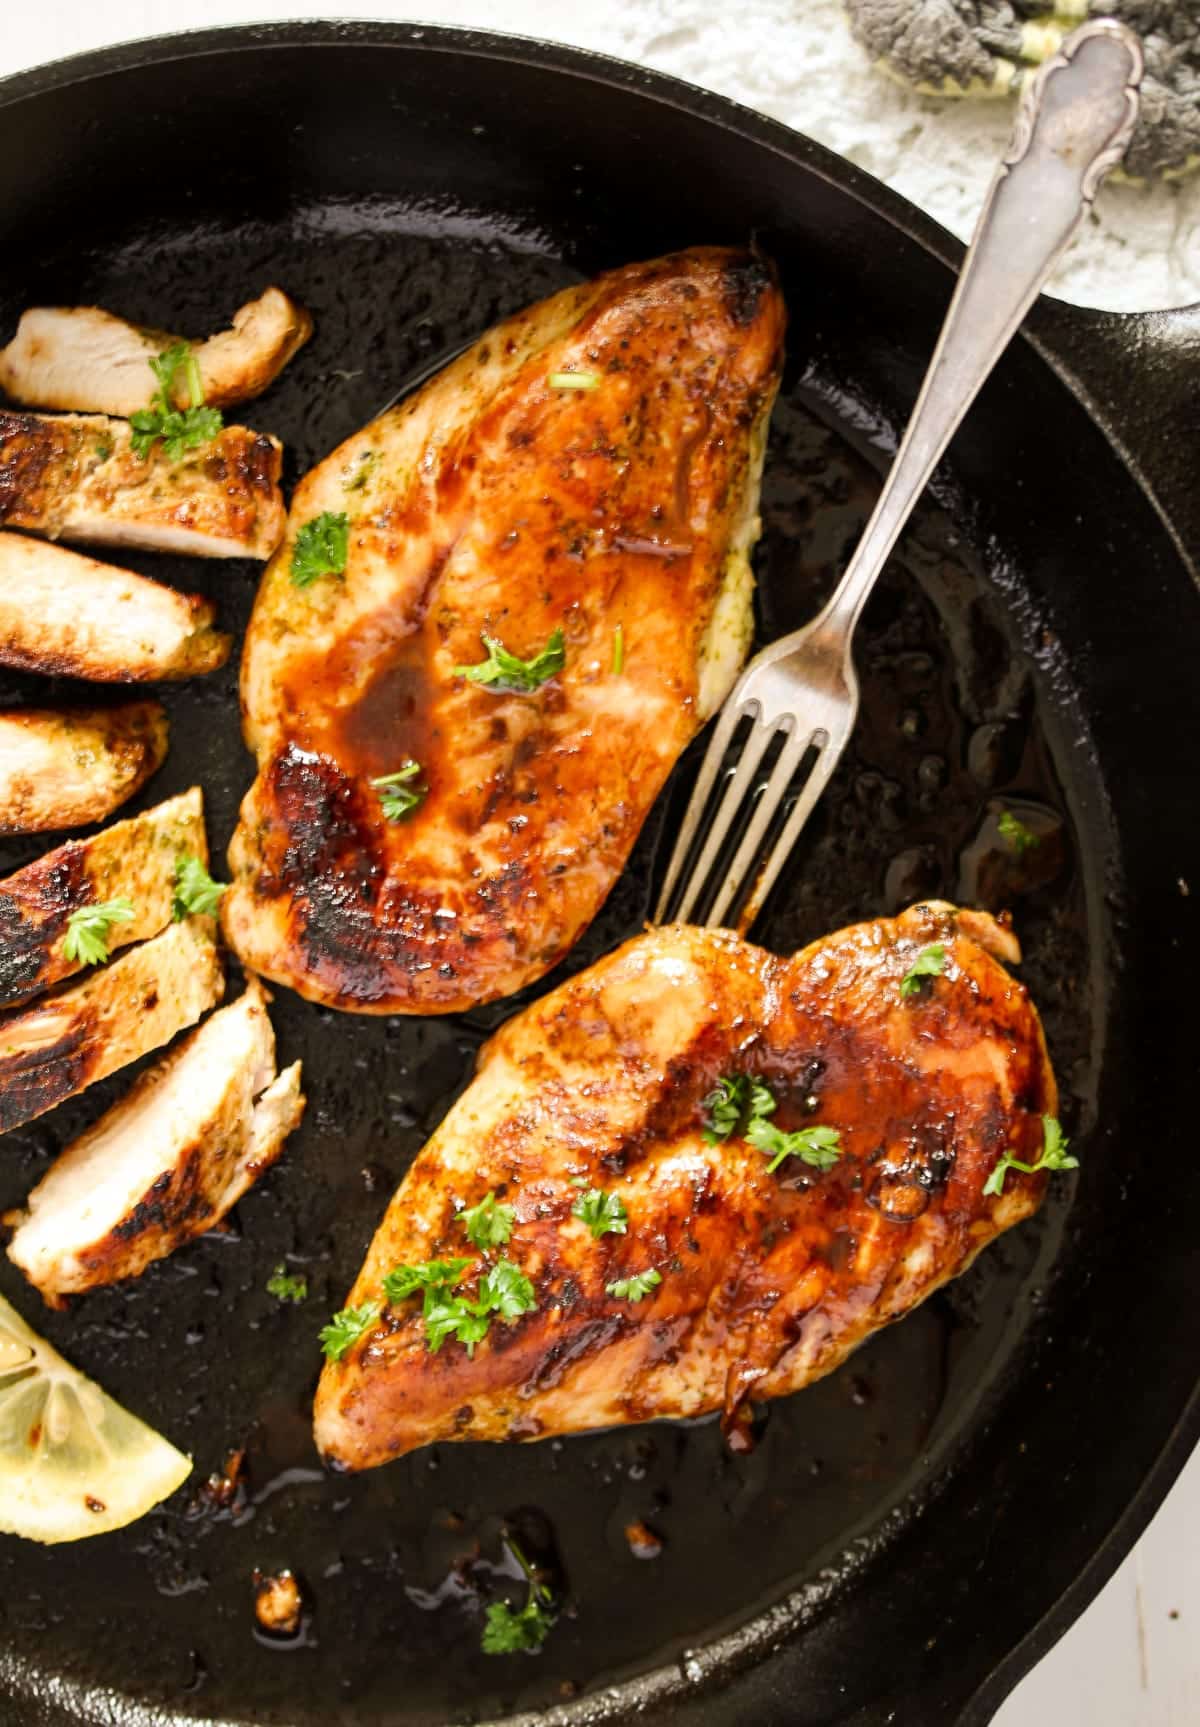 two pieces of golden chicken breast and another one sliced in a cast iron skillet.